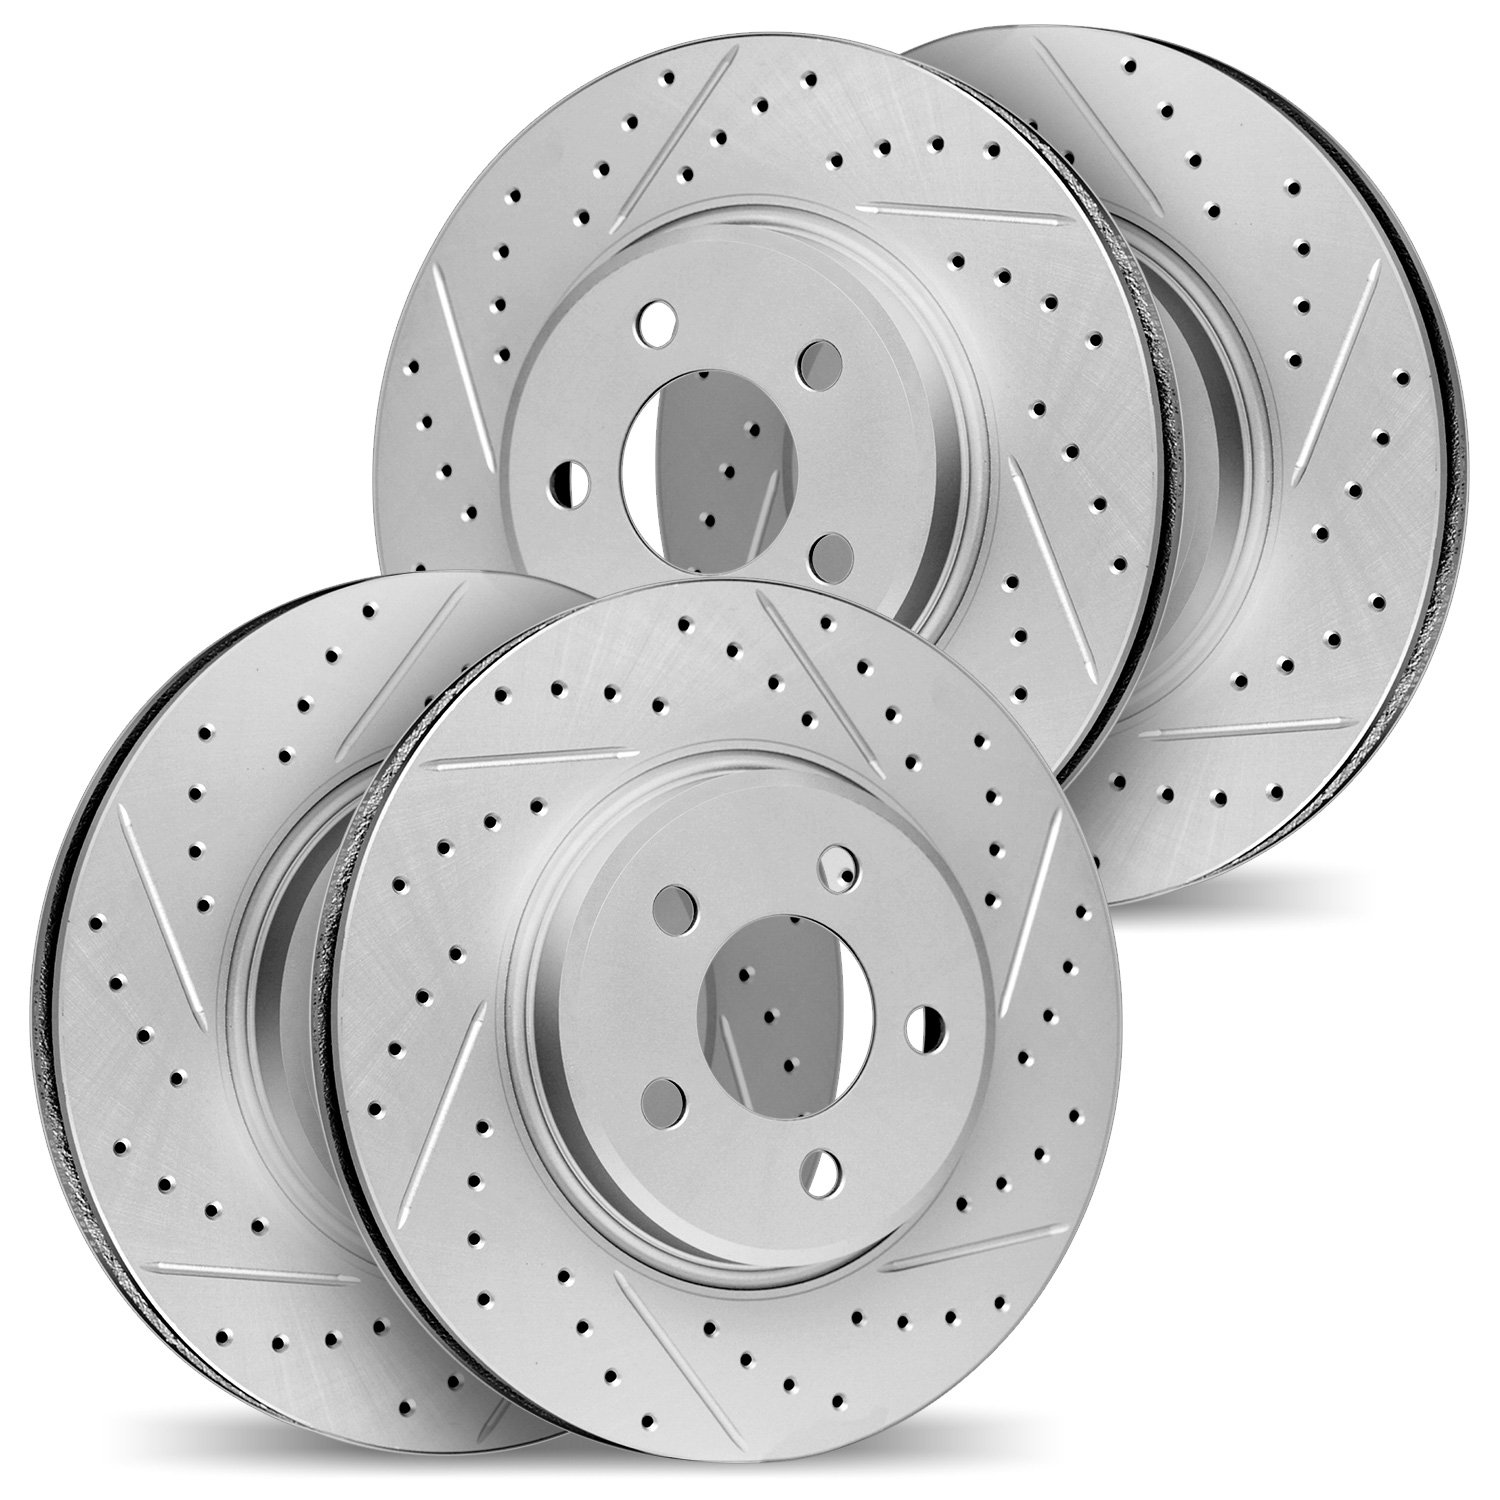 2004-67043 Geoperformance Drilled/Slotted Brake Rotors, 2009-2017 Multiple Makes/Models, Position: Front and Rear